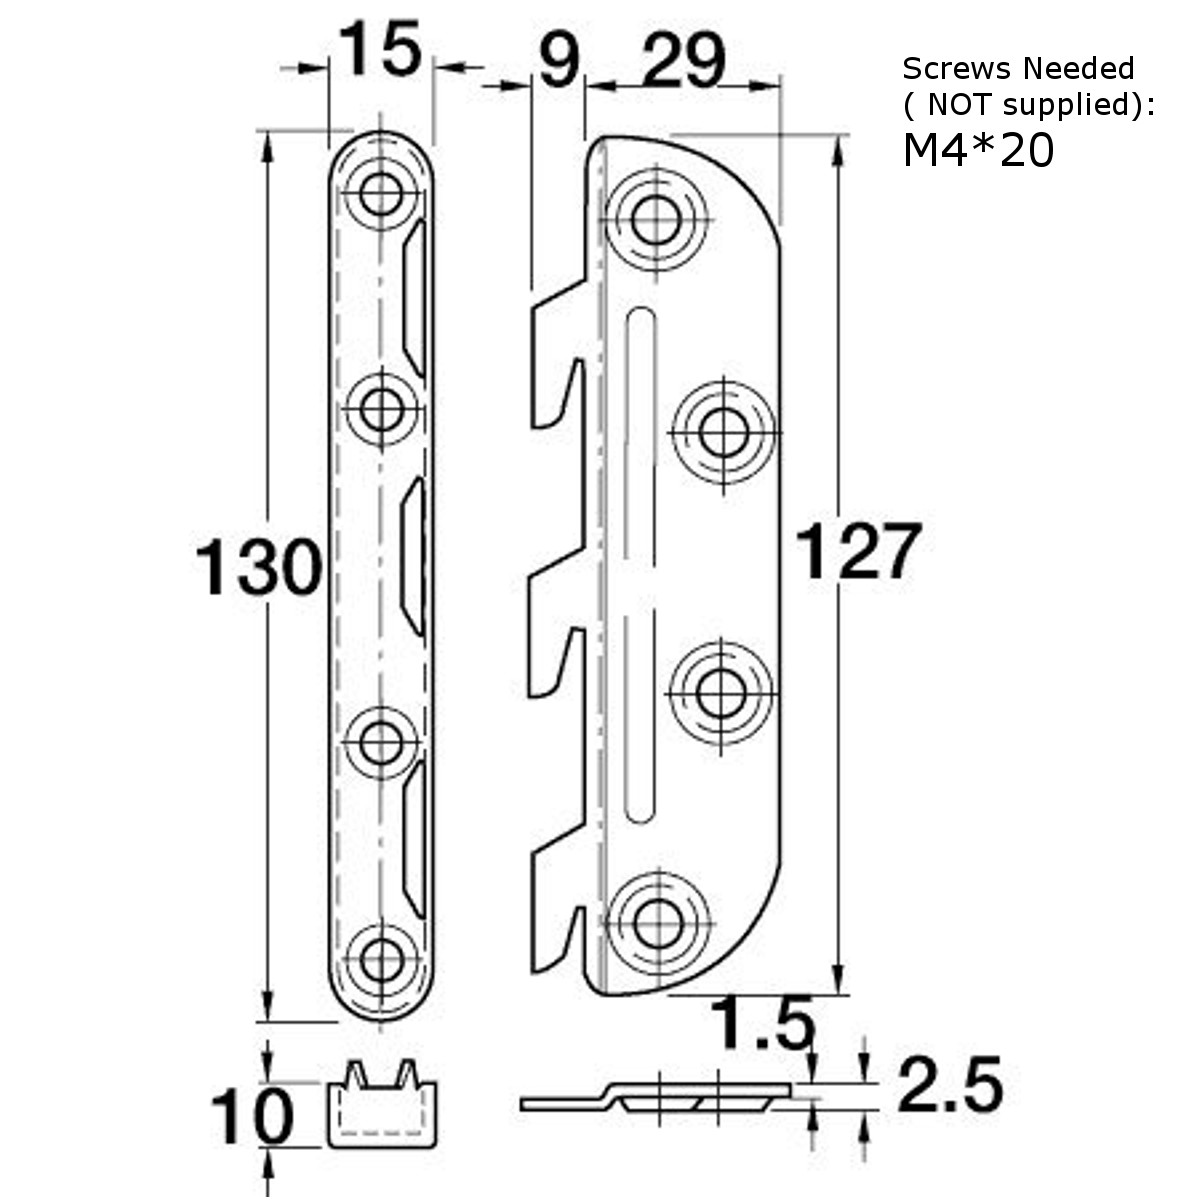 8PcsSet-Bed-Fittings-Connectors-Brackets-Joiners-Replacement-127mm-1142757